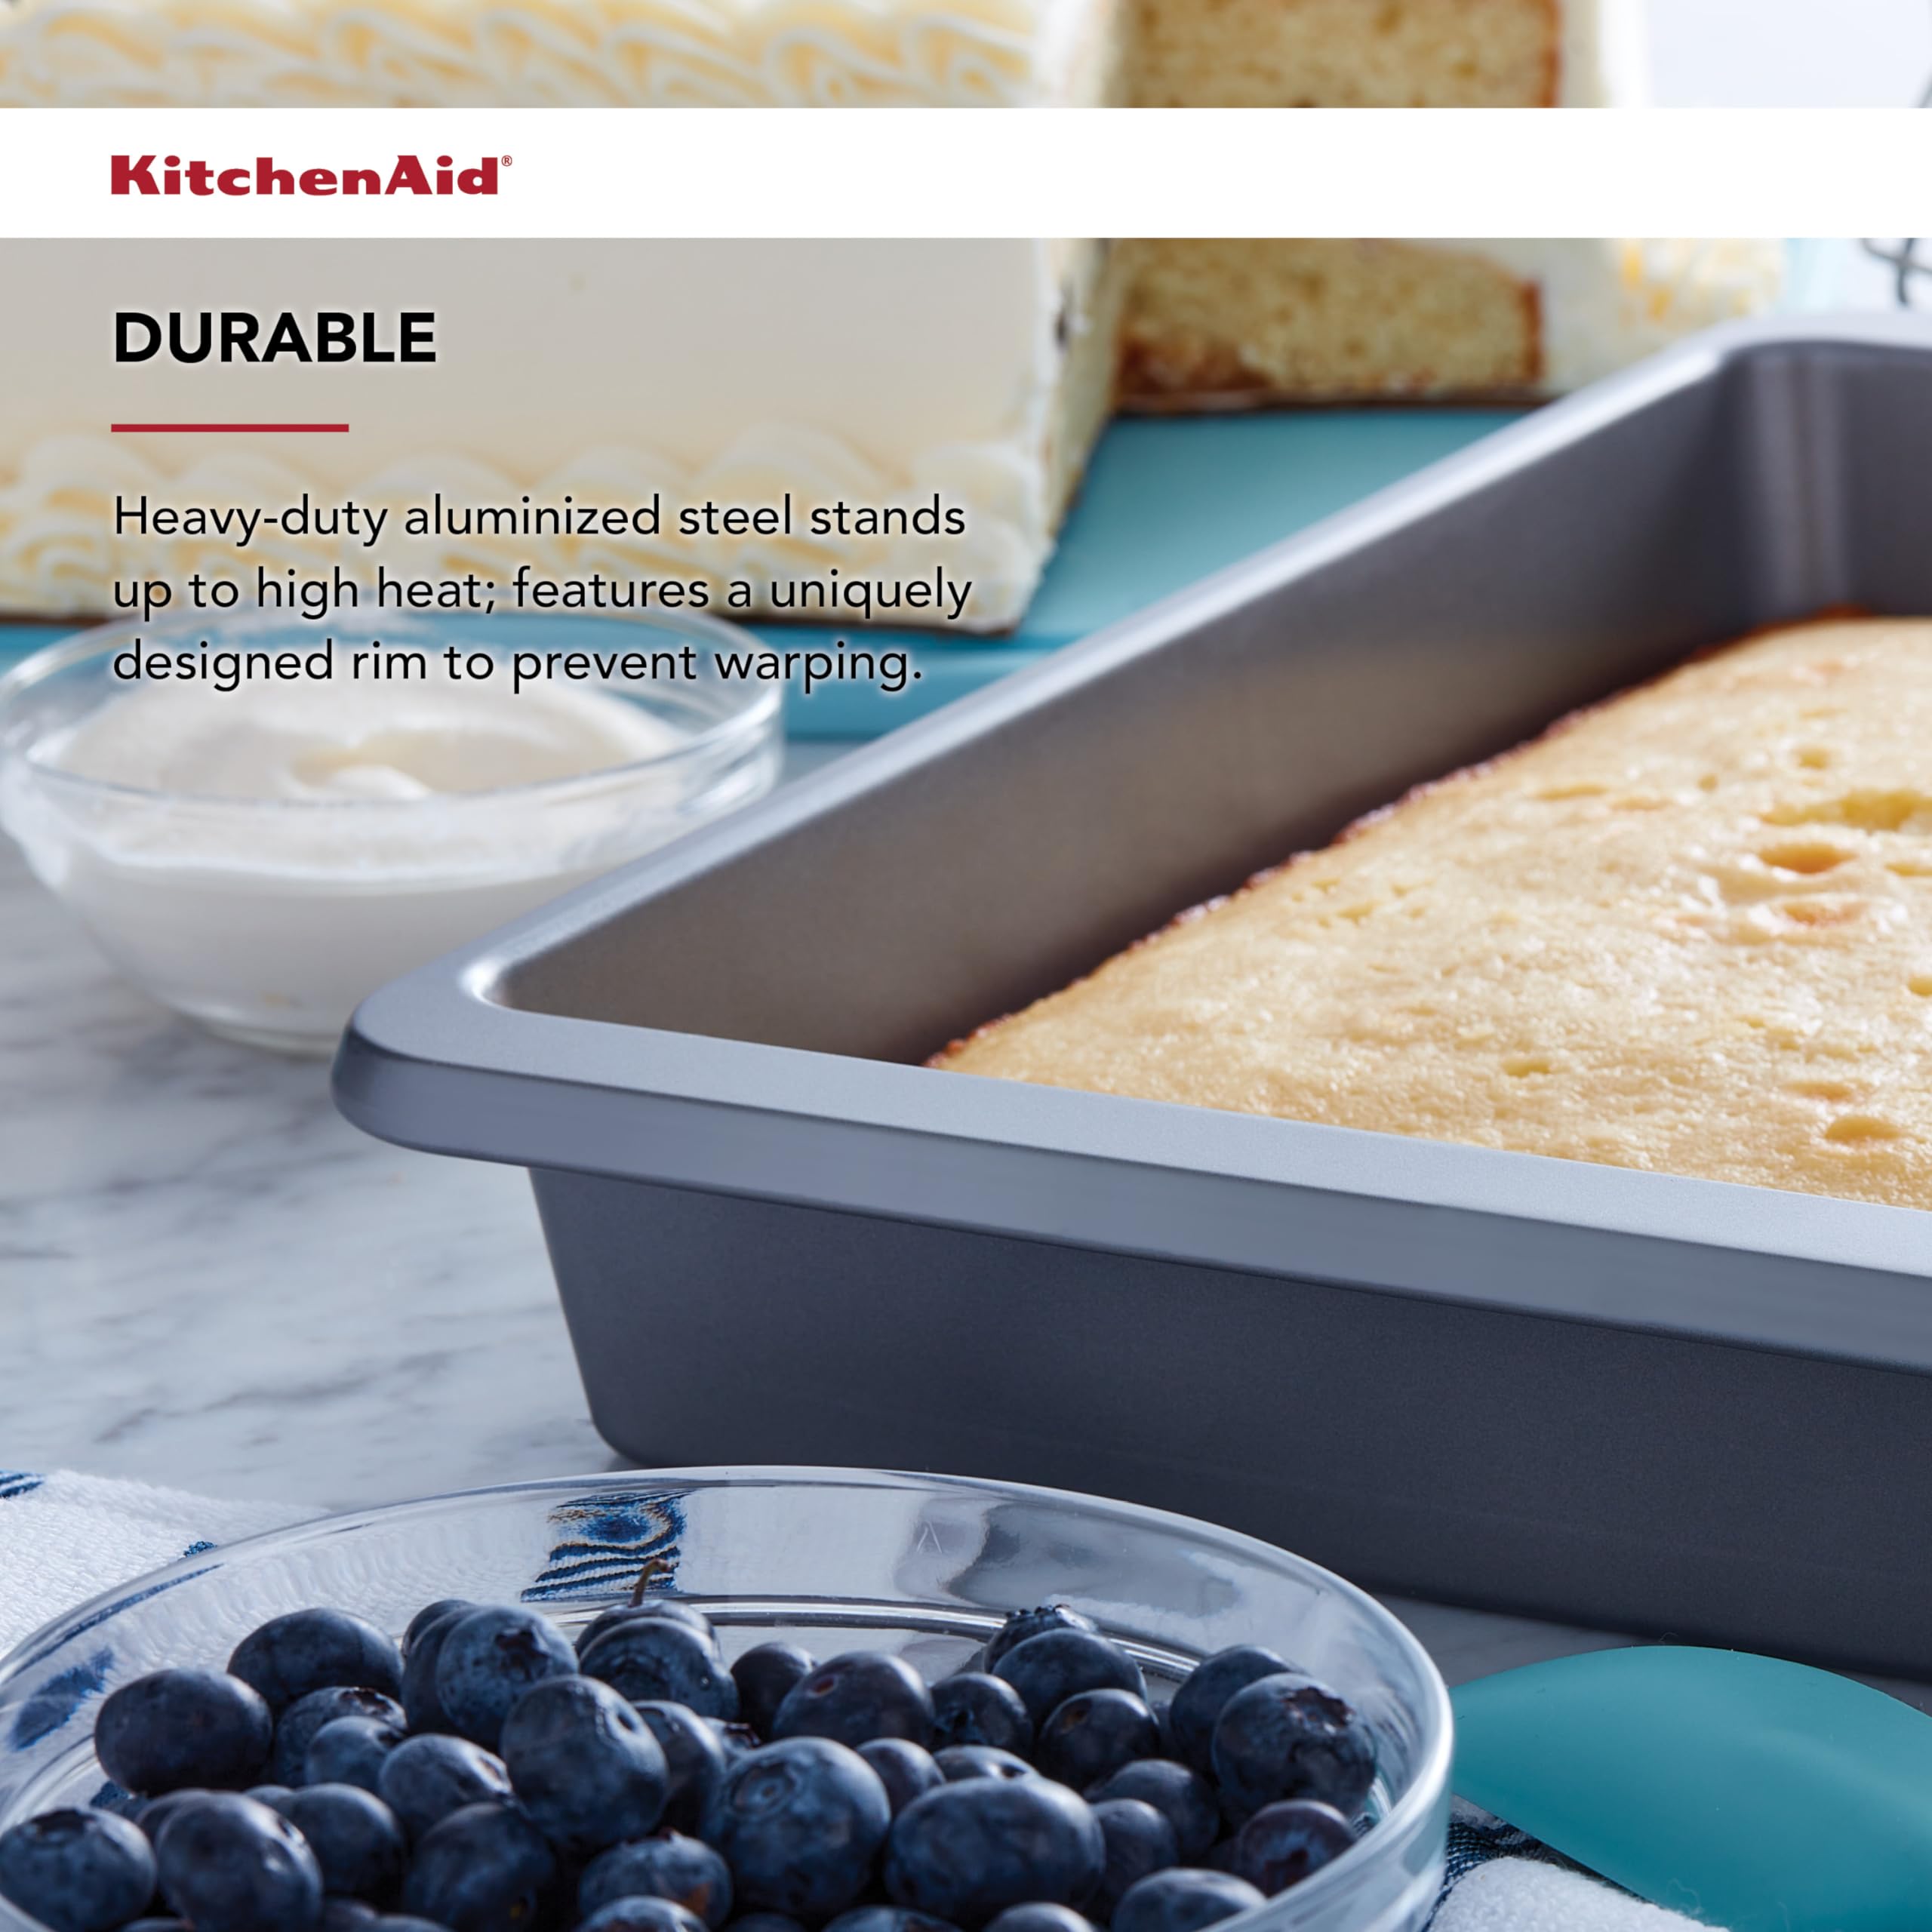 KitchenAid Nonstick 9x 13 in Cake Pan with Extended Handles for Easy Grip, Aluminized Steel to Promoted Even Baking, Dishwasher Safe,Contour Silver